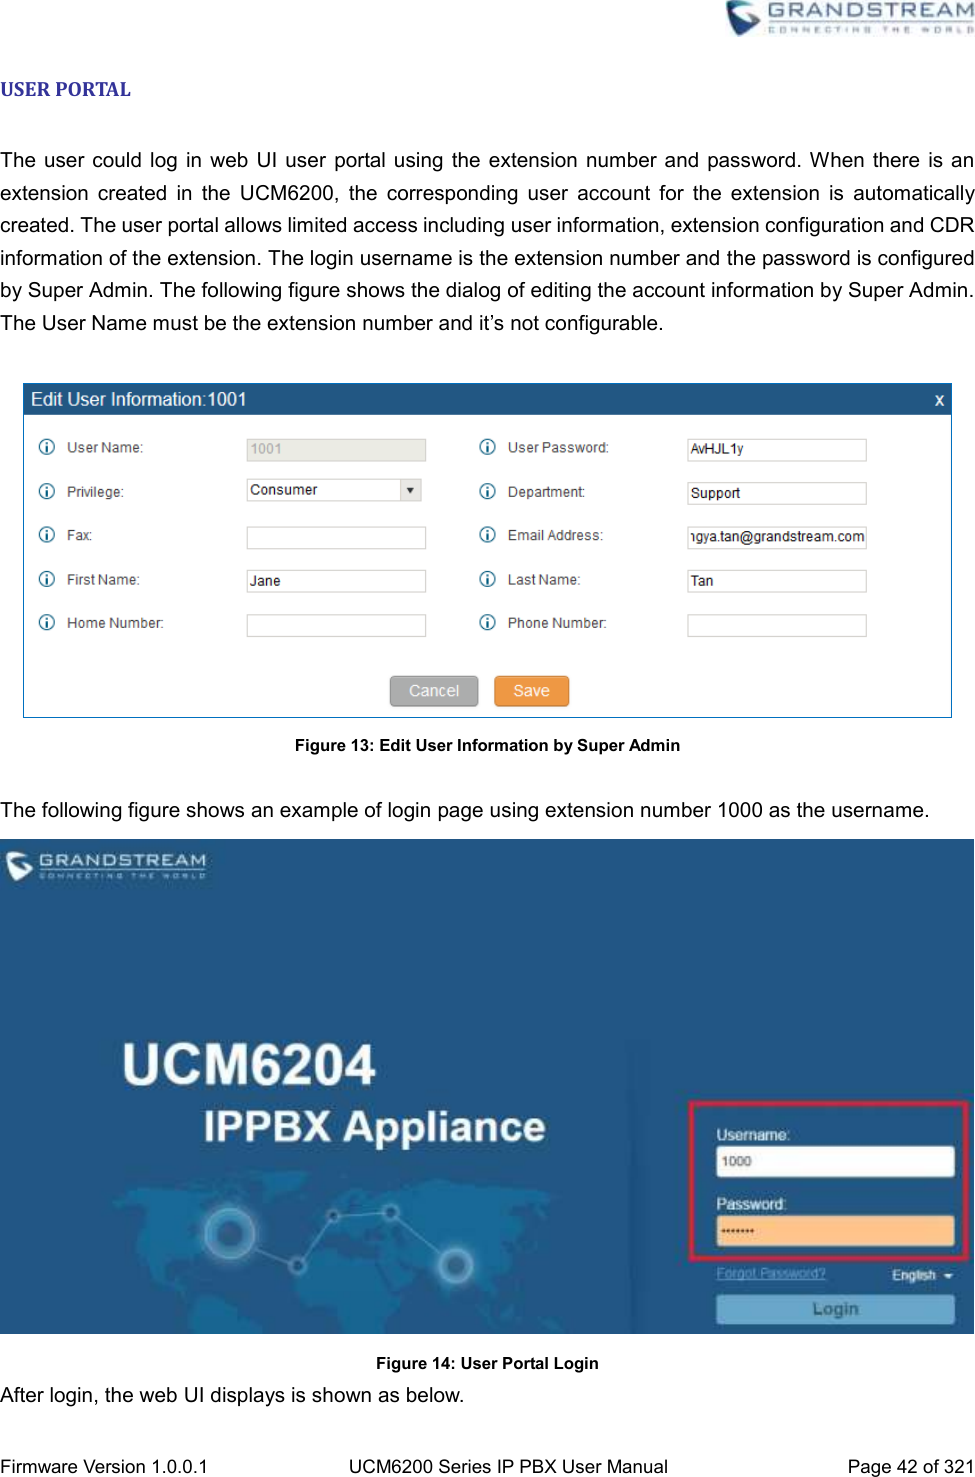  Firmware Version 1.0.0.1 UCM6200 Series IP PBX User Manual Page 42 of 321    USER PORTAL  The user  could log  in web UI user  portal using the  extension  number and  password. When there  is an extension  created  in  the  UCM6200,  the  corresponding  user  account  for  the  extension  is  automatically created. The user portal allows limited access including user information, extension configuration and CDR information of the extension. The login username is the extension number and the password is configured by Super Admin. The following figure shows the dialog of editing the account information by Super Admin. The User Name must be the extension number and it’s not configurable.   Figure 13: Edit User Information by Super Admin  The following figure shows an example of login page using extension number 1000 as the username.  Figure 14: User Portal Login After login, the web UI displays is shown as below. 